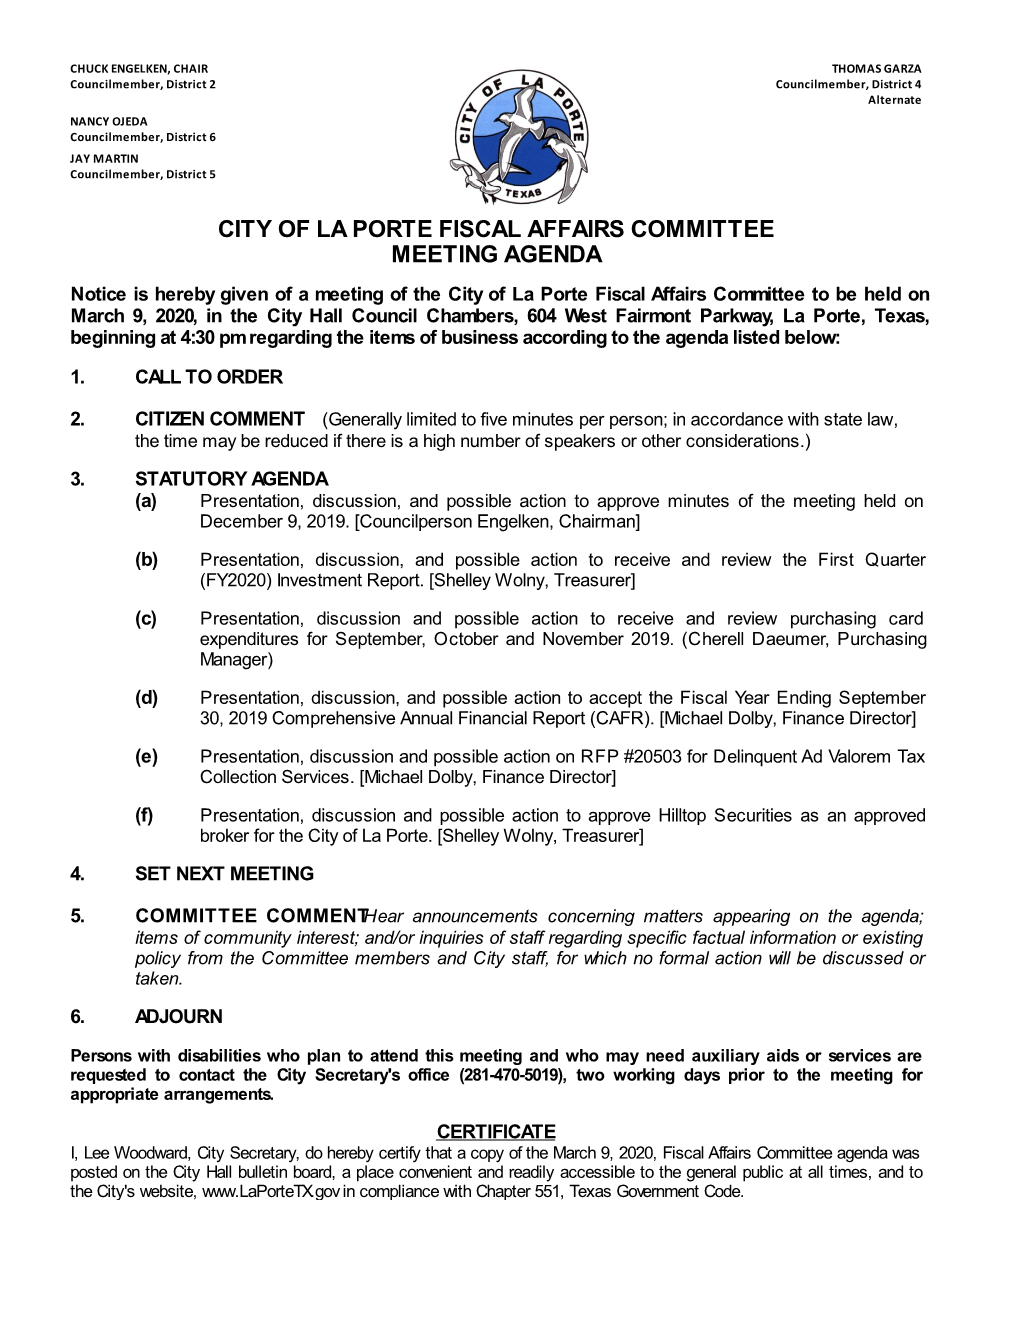 Fiscal Affairs Committee Meeting Agenda & Packet